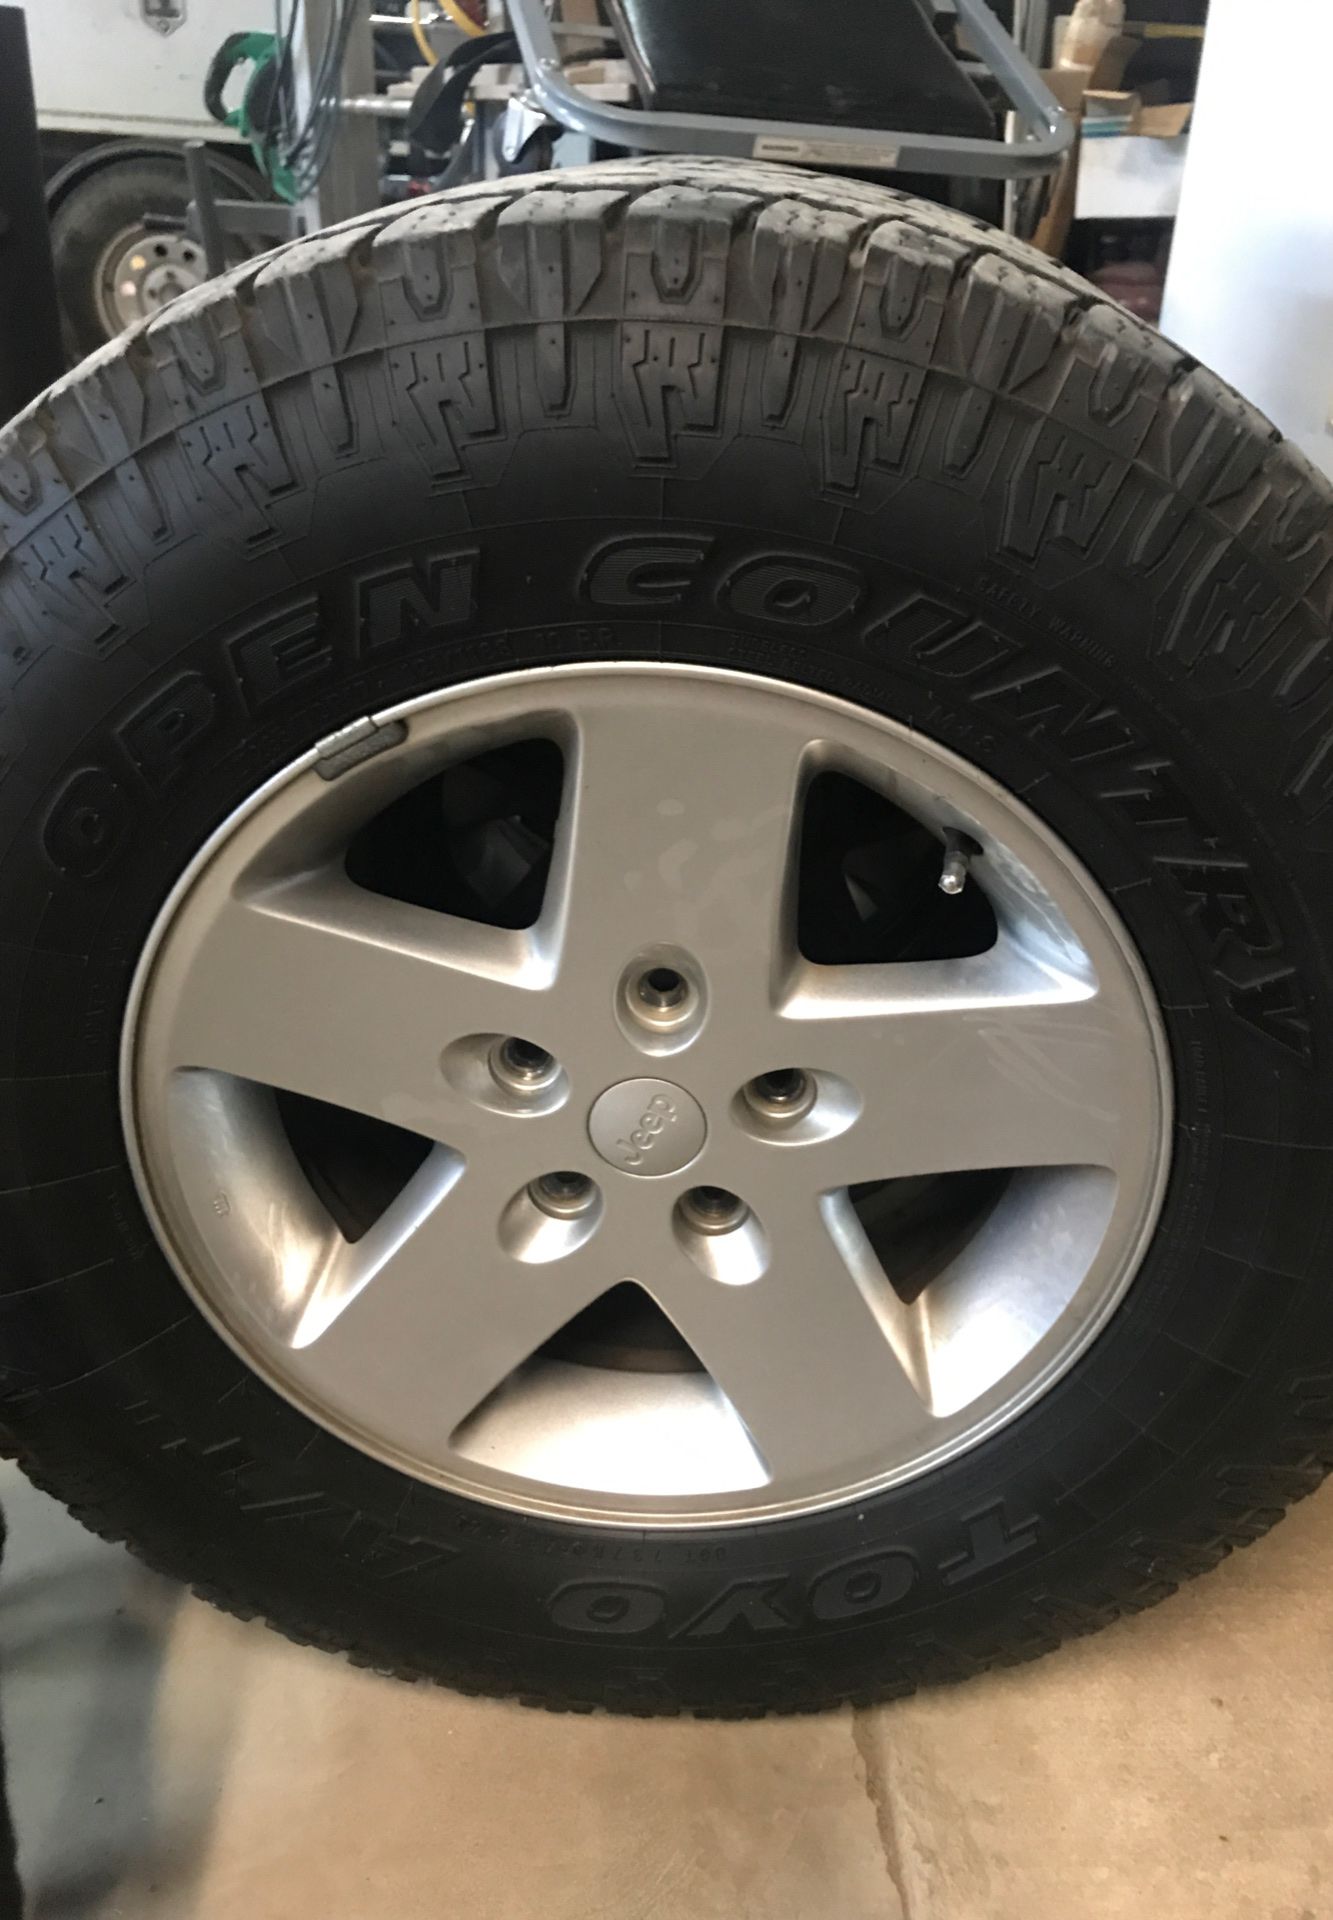 Jeep wheels and tires Lt265/70R70 Toyo tires REASONABLE OFFERS ACCEPTED